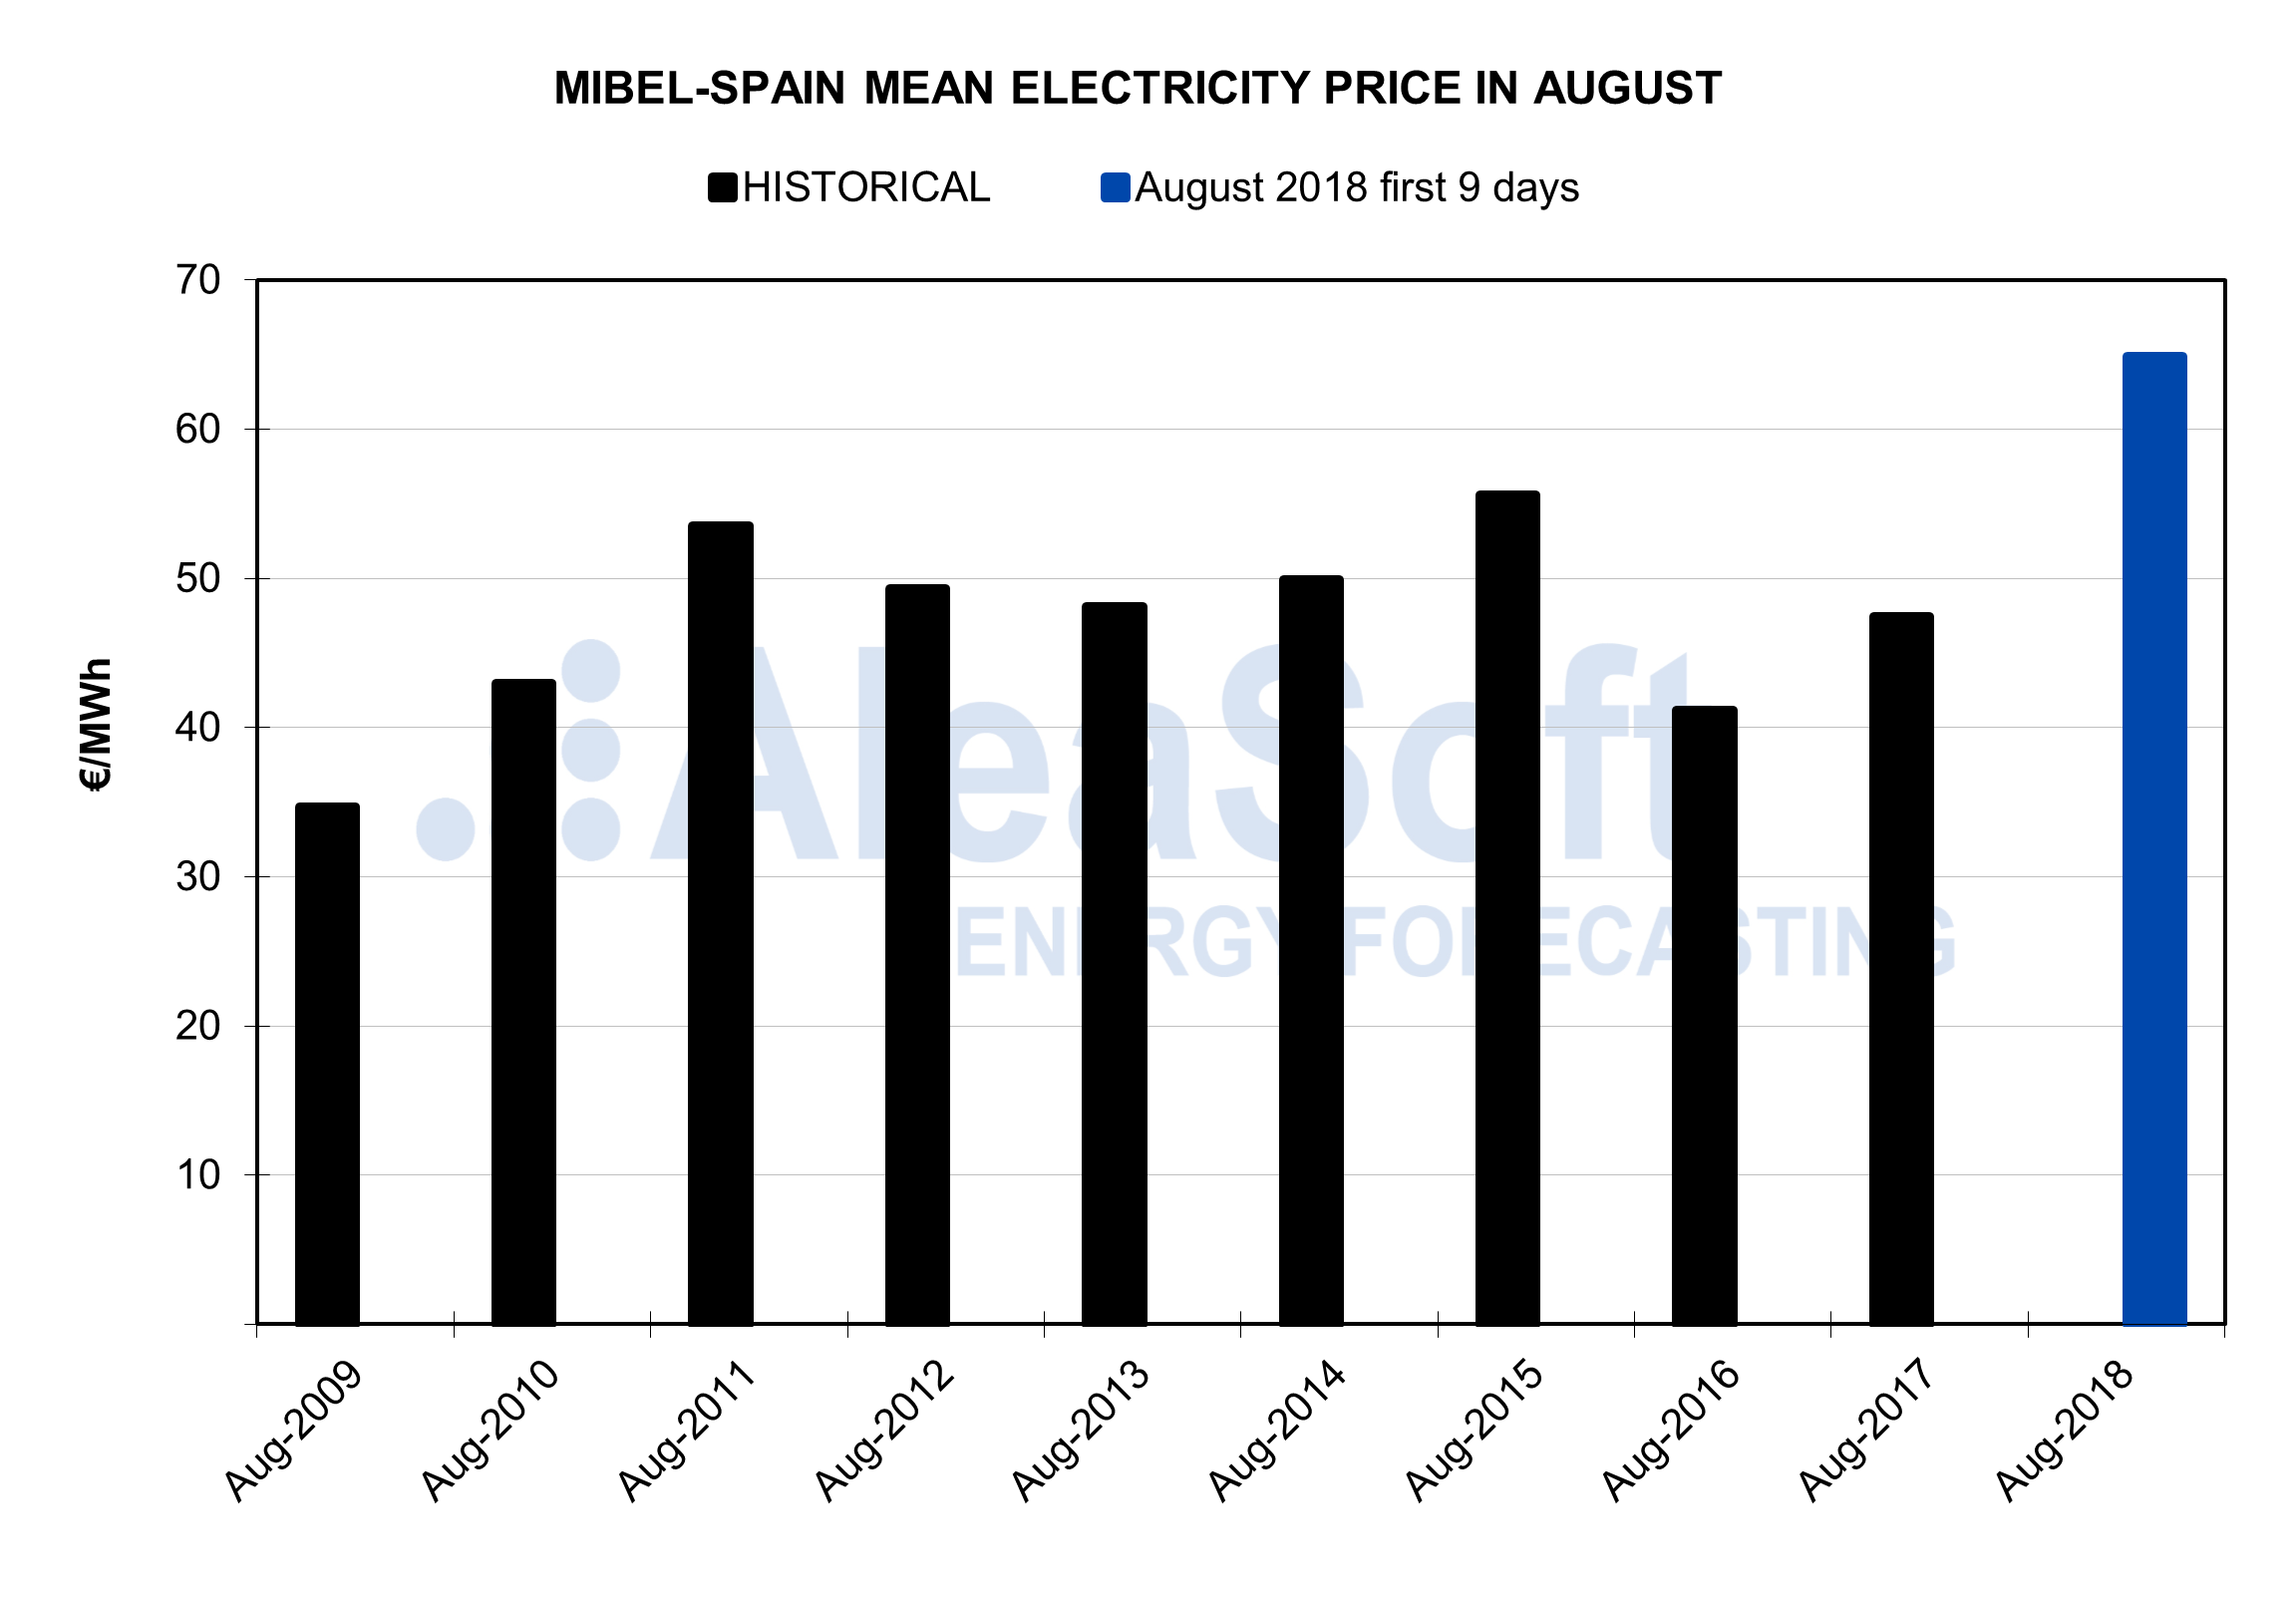 AleaSoft - MIBEL-Spain mean electricity price in August